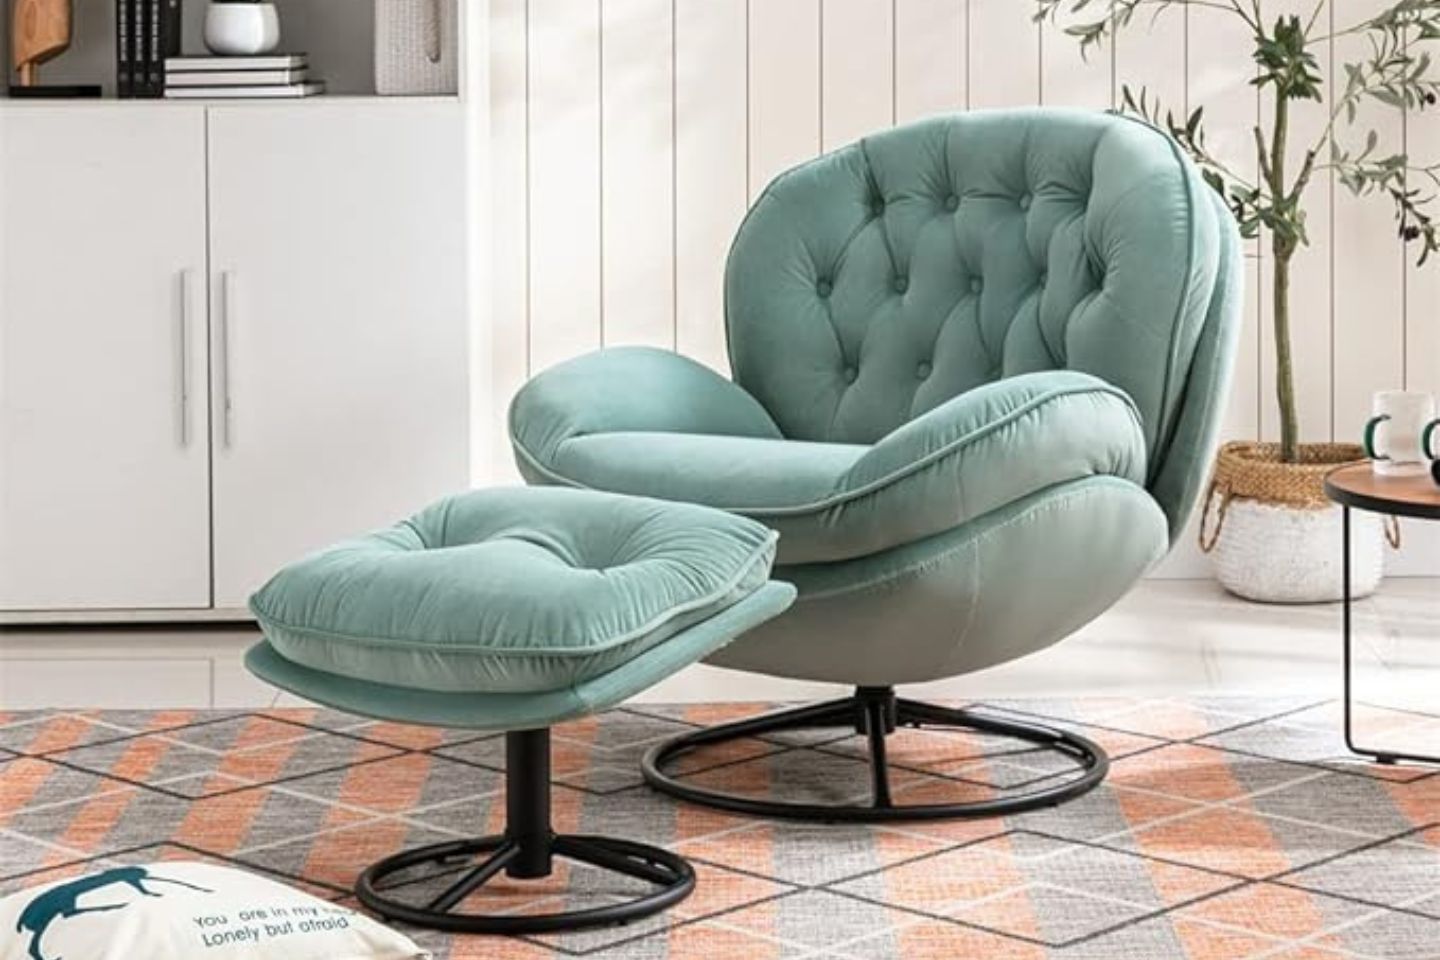 Back in the Comfort Zone: 5 Coziest Ergonomic Living Room Chairs